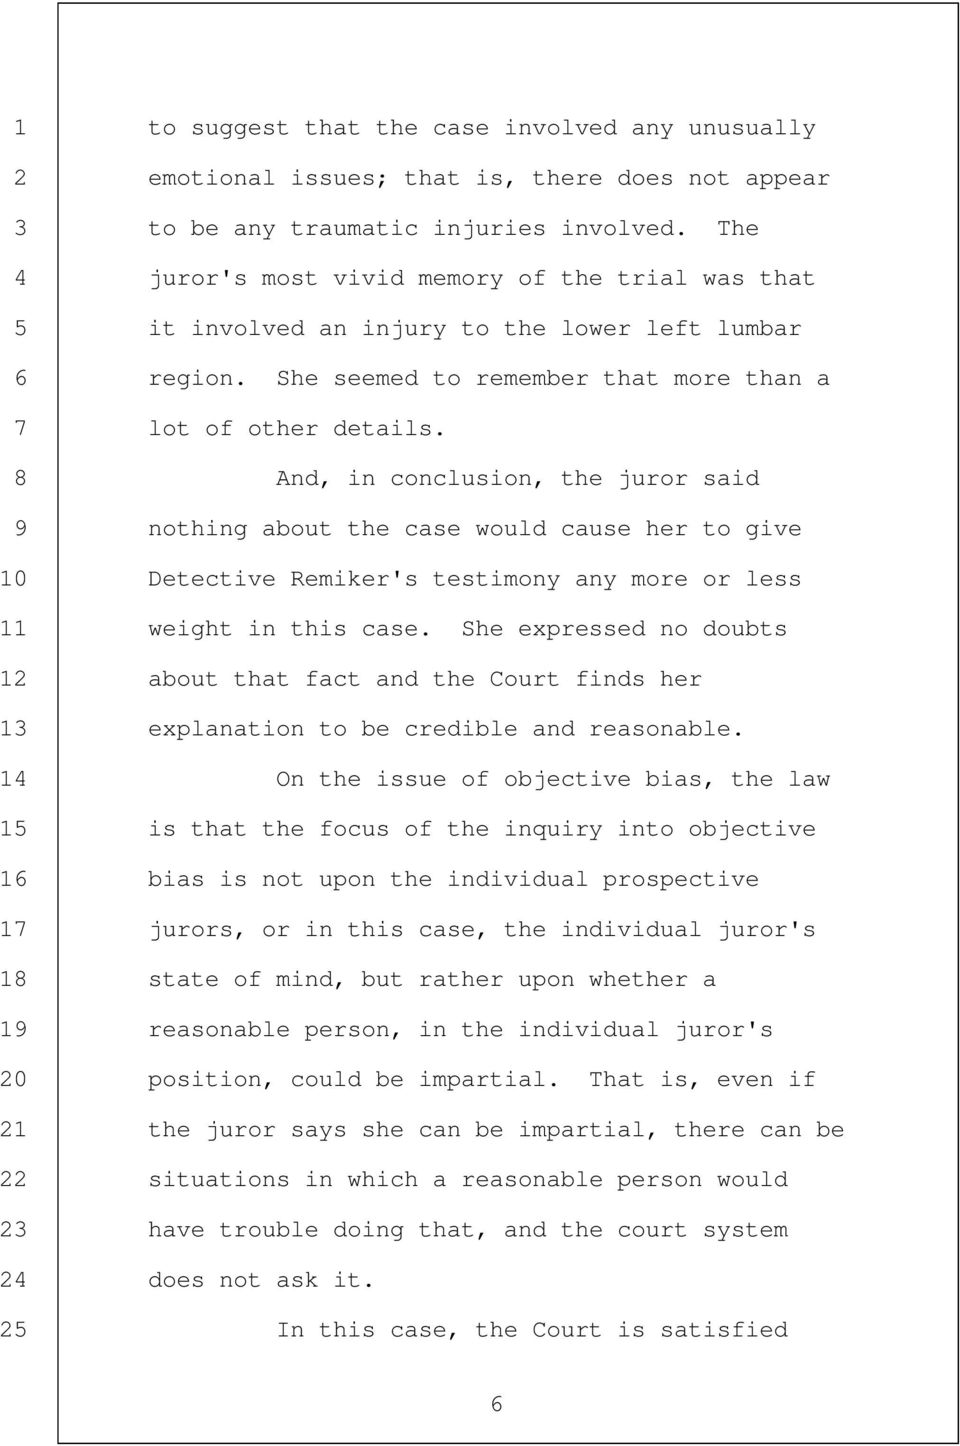 8 And, in conclusion, the juror said 9 nothing about the case would cause her to give 10 Detective Remiker's testimony any more or less 11 weight in this case.